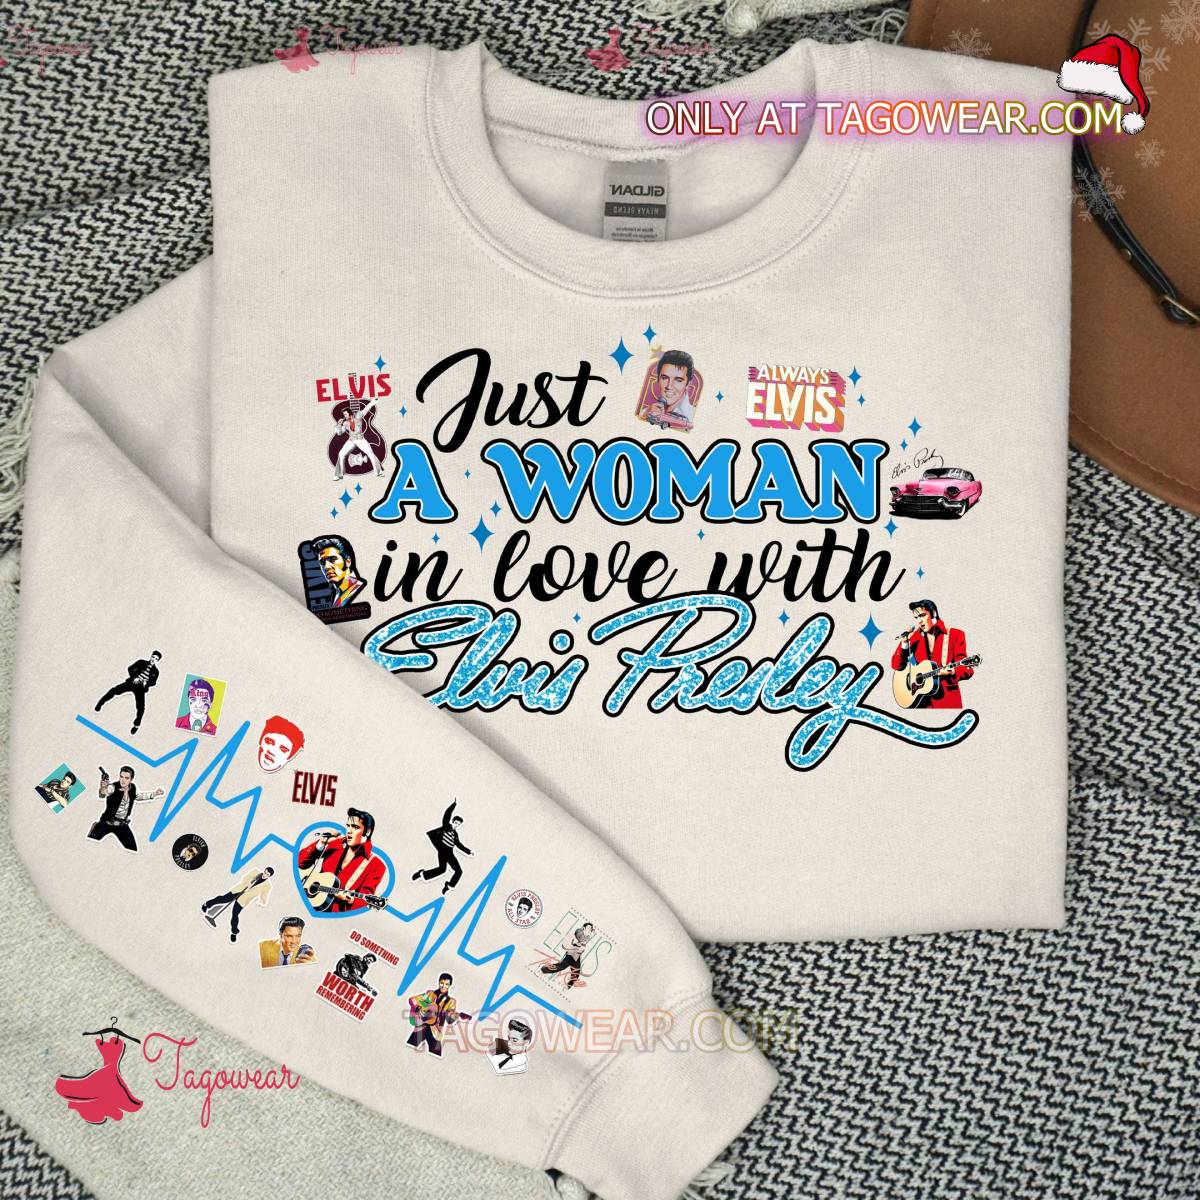 Just A Woman In Love With Elvis Presley Sweatshirt a